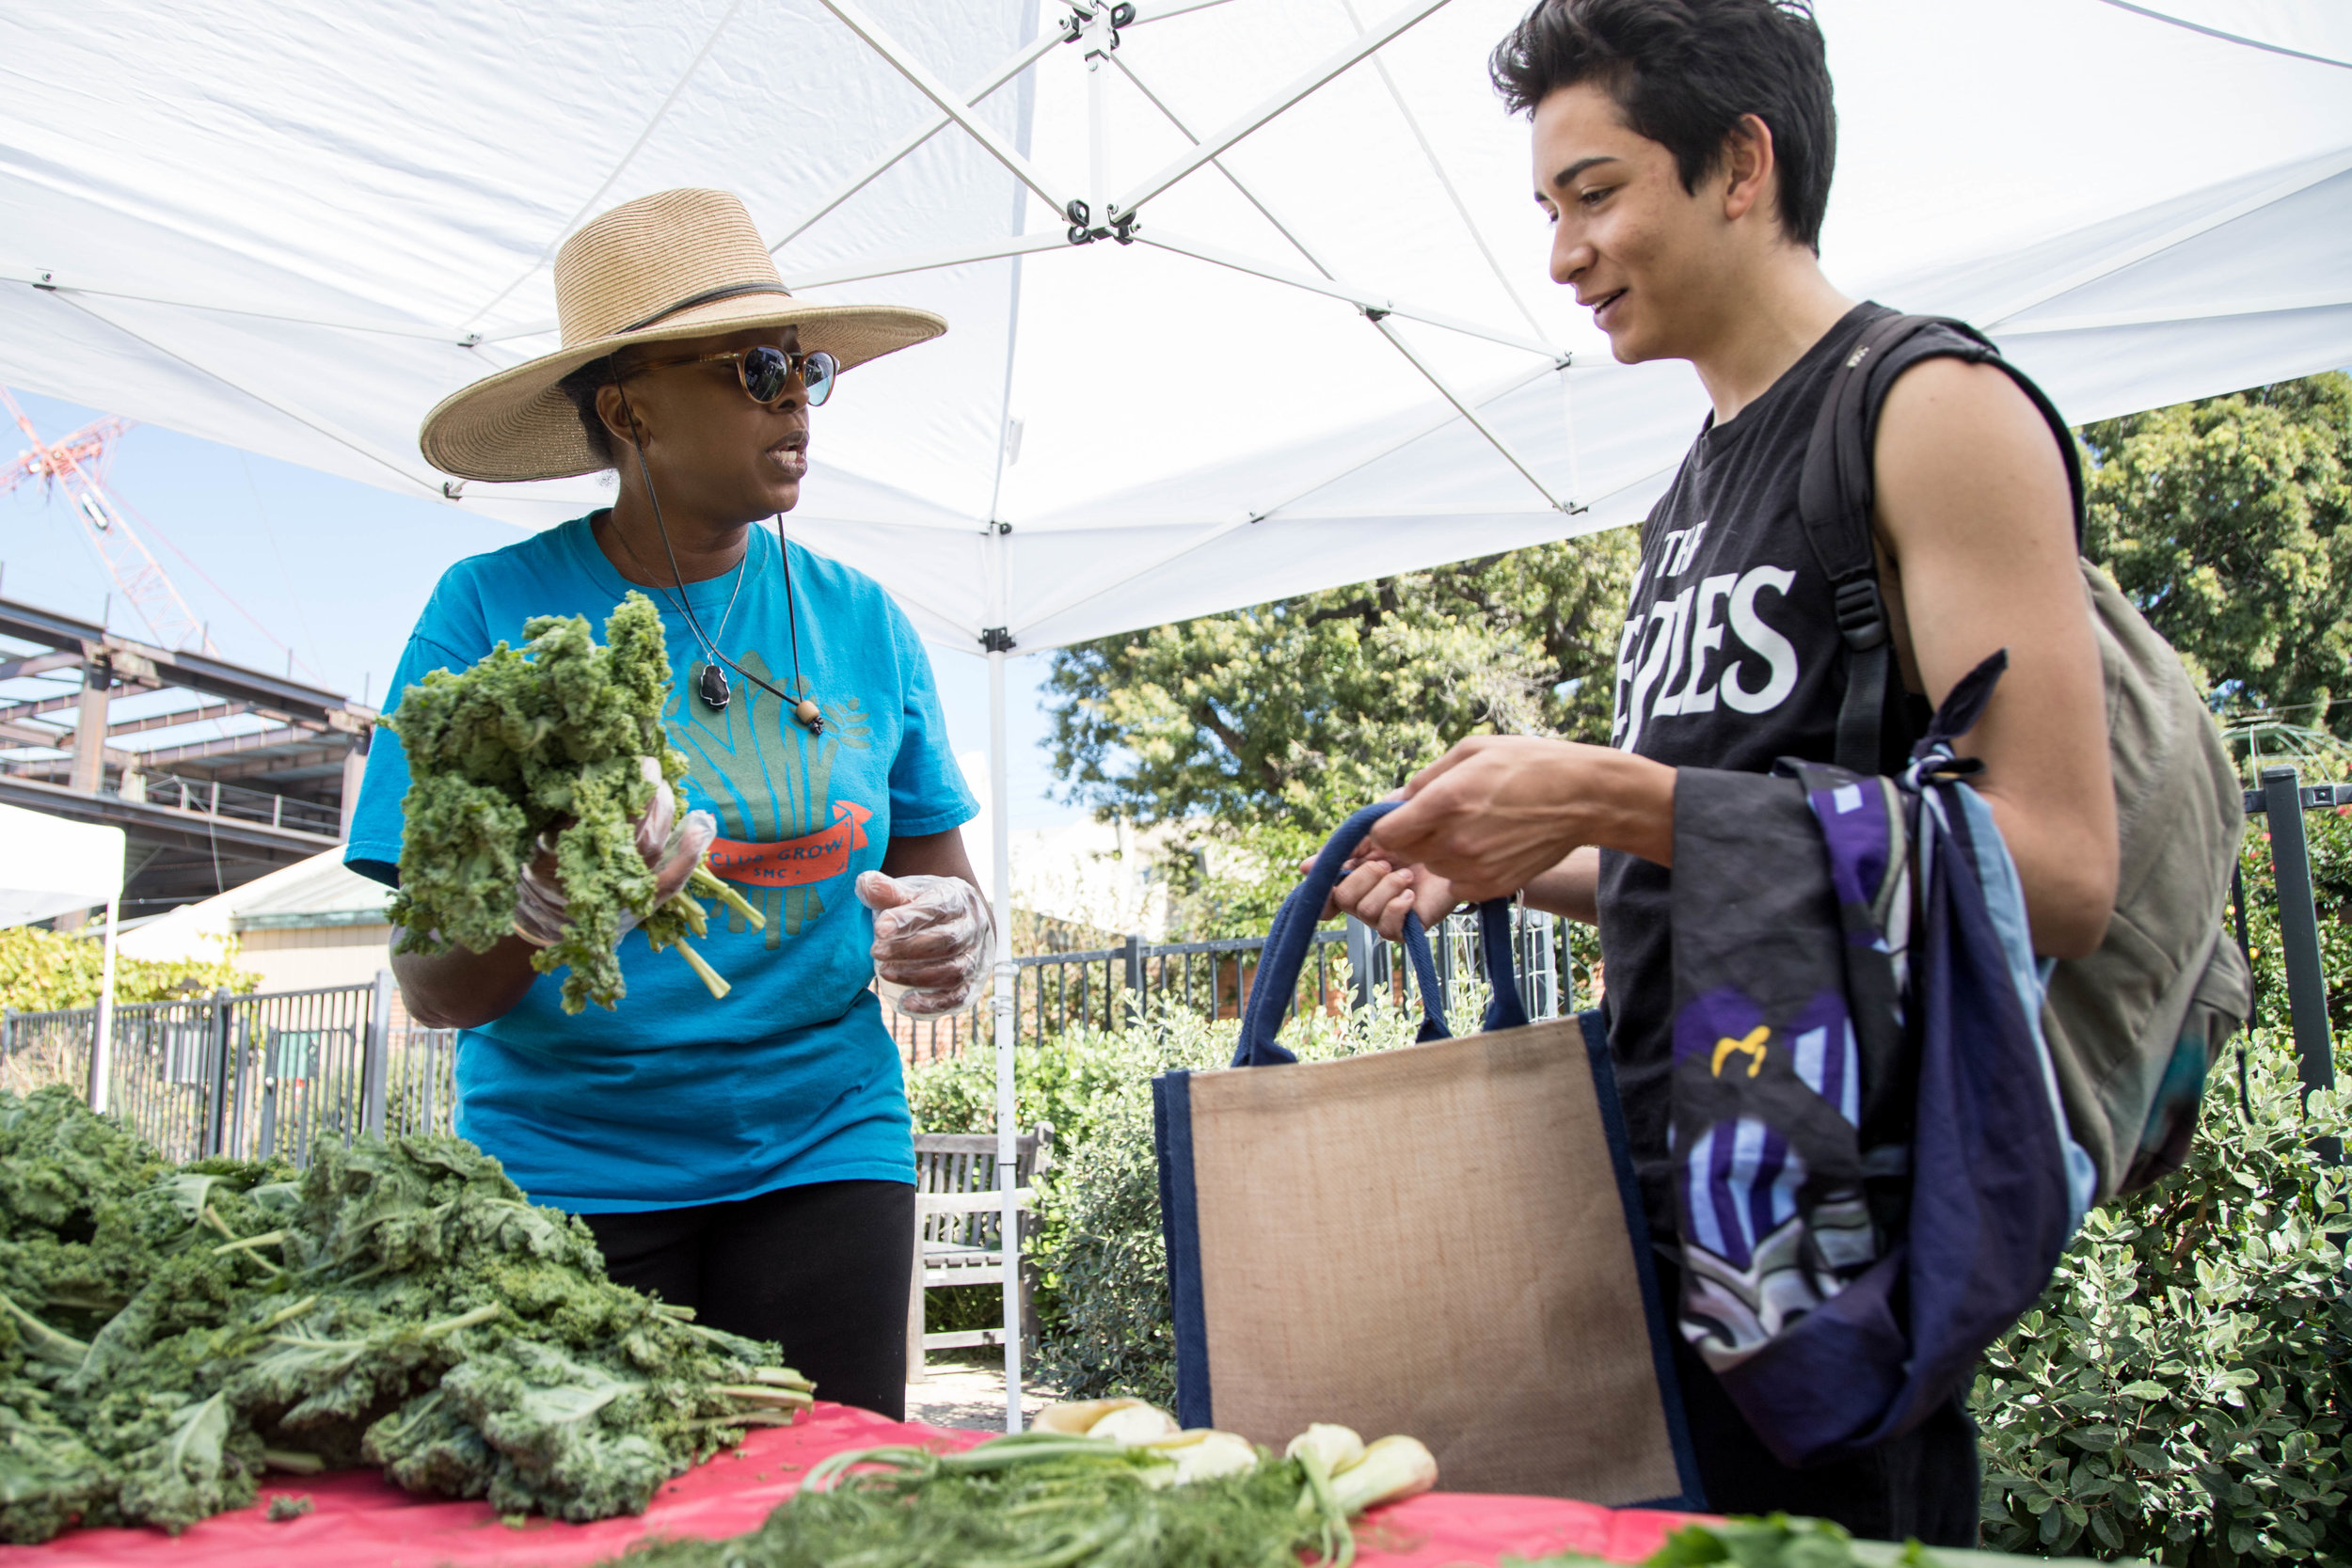  Seventeen year old Santa Monica College student Marco Garcia visits the Free Corsair Farmers Market for the first time on October 16, 2017. He gets advice on how to cook greens from Garden manager Cynthia Kraus during Sustainability Week at SMC in S